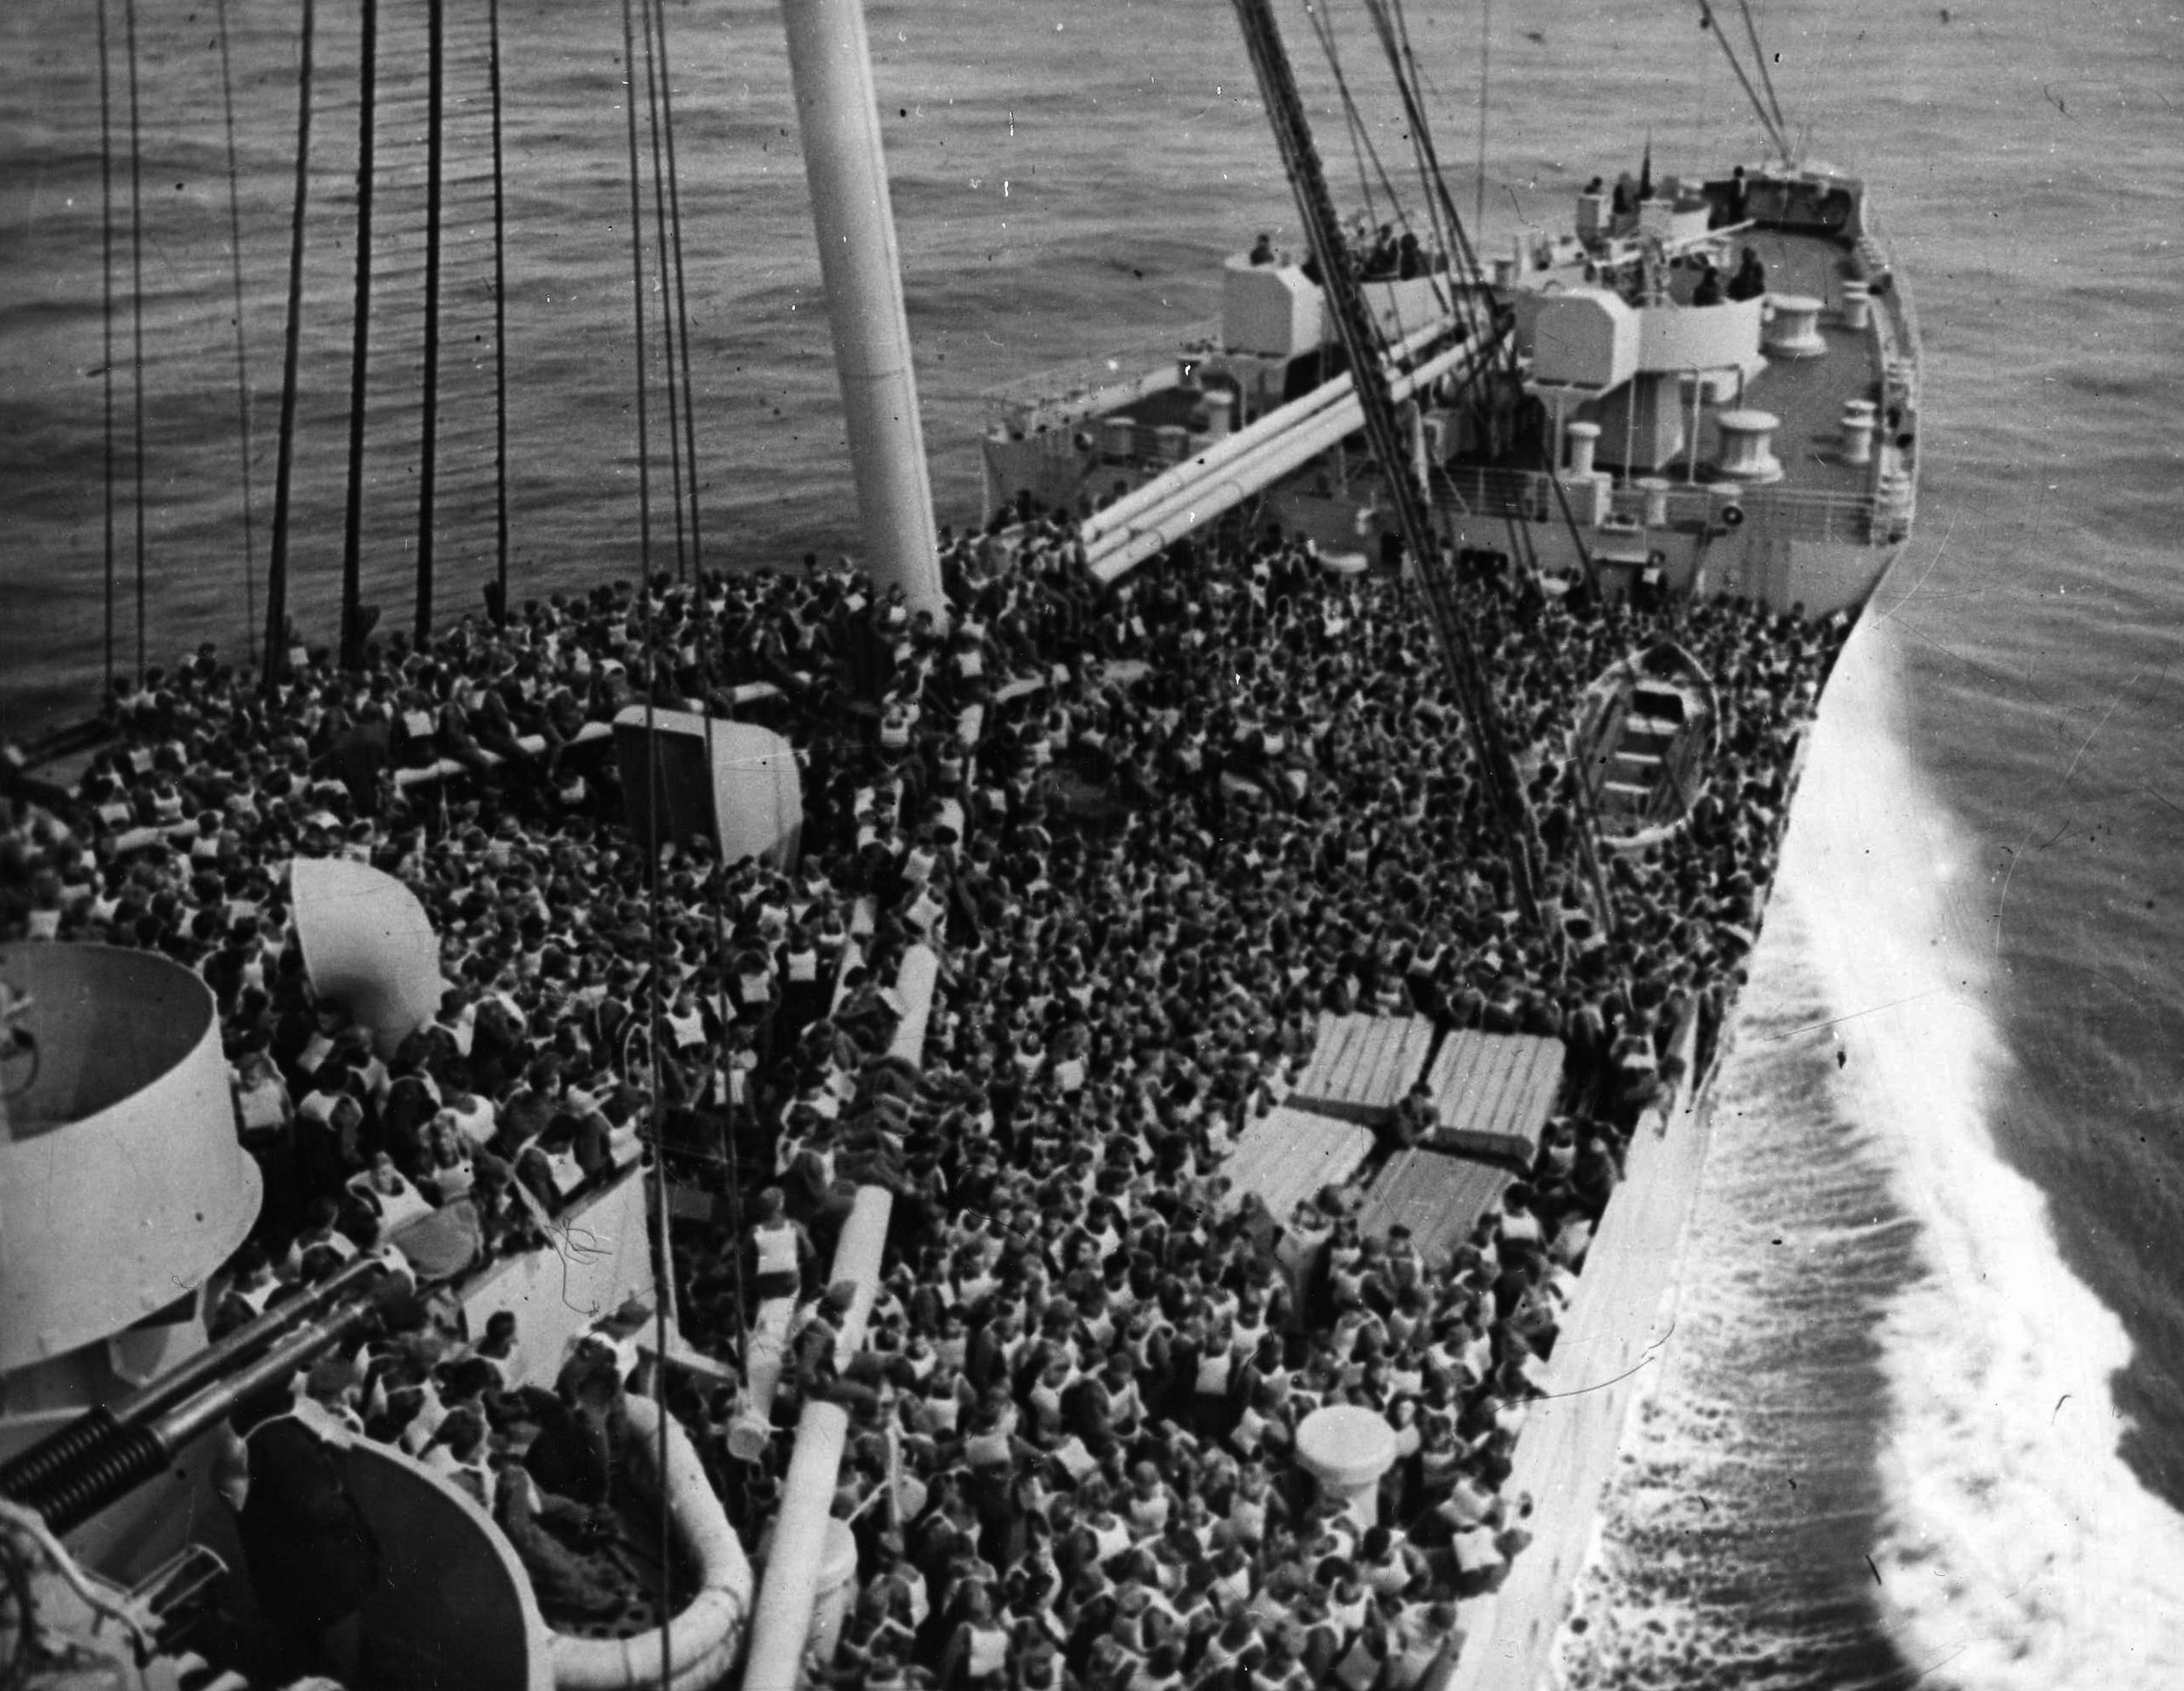 Troops crowd the deck during a lifeboat drill aboard the Queen Mary in December 1944. The luxury liner churns the sea swiftly, her captain and crew wary of the threat of German U-boats. 
